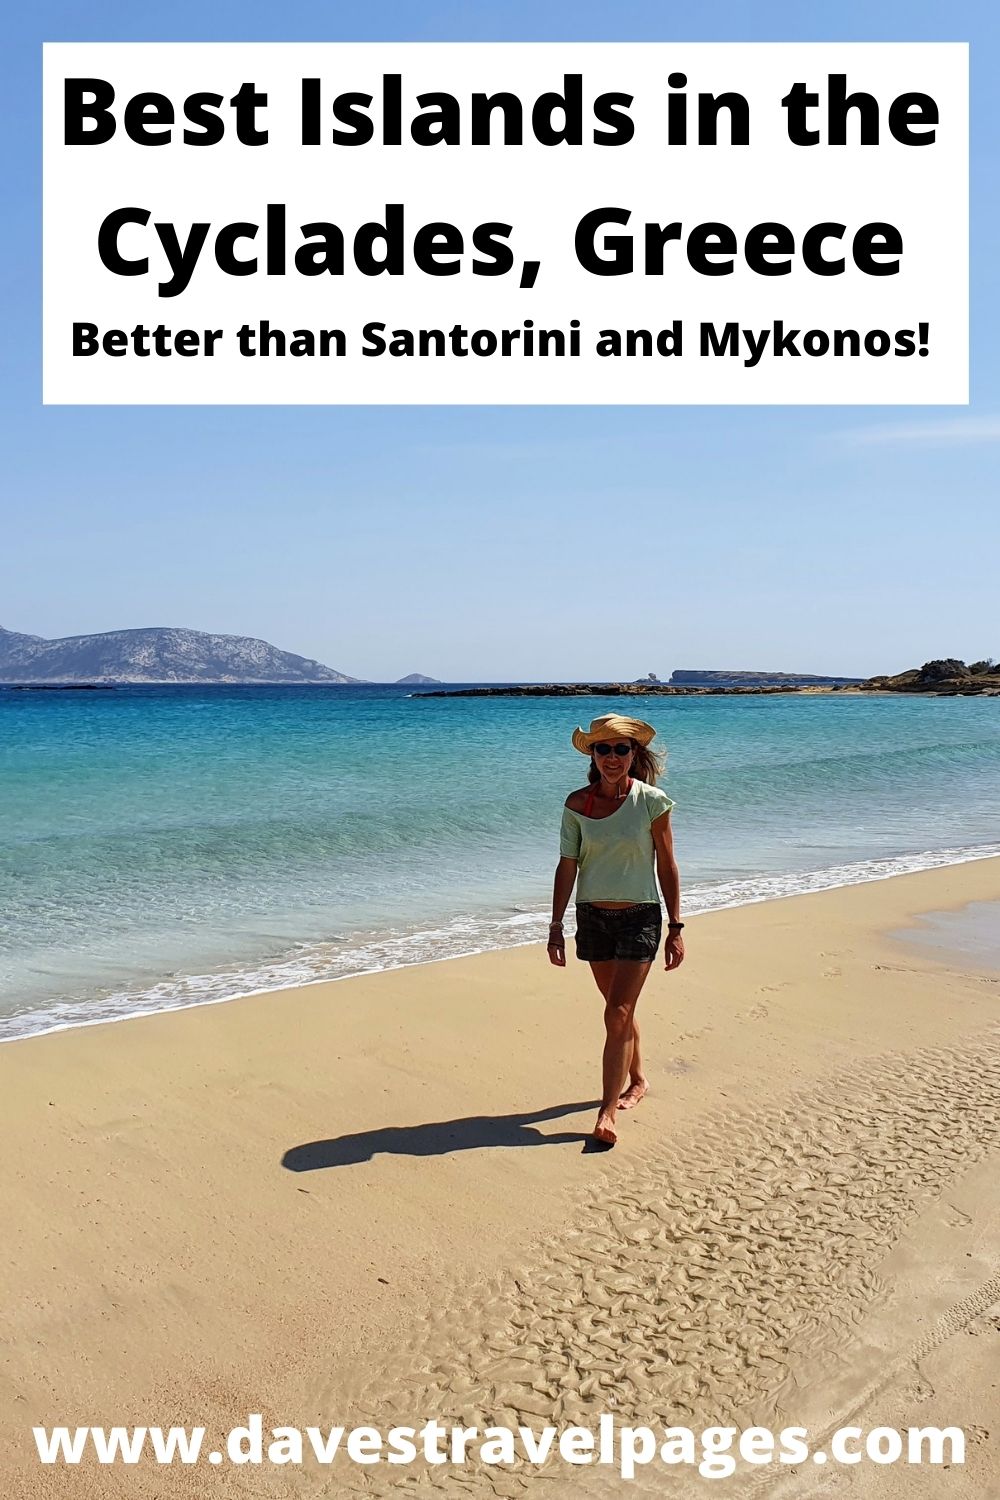 A guide to the best islands in the Cyclades of Greece (even better than Santorini and Mykonos)